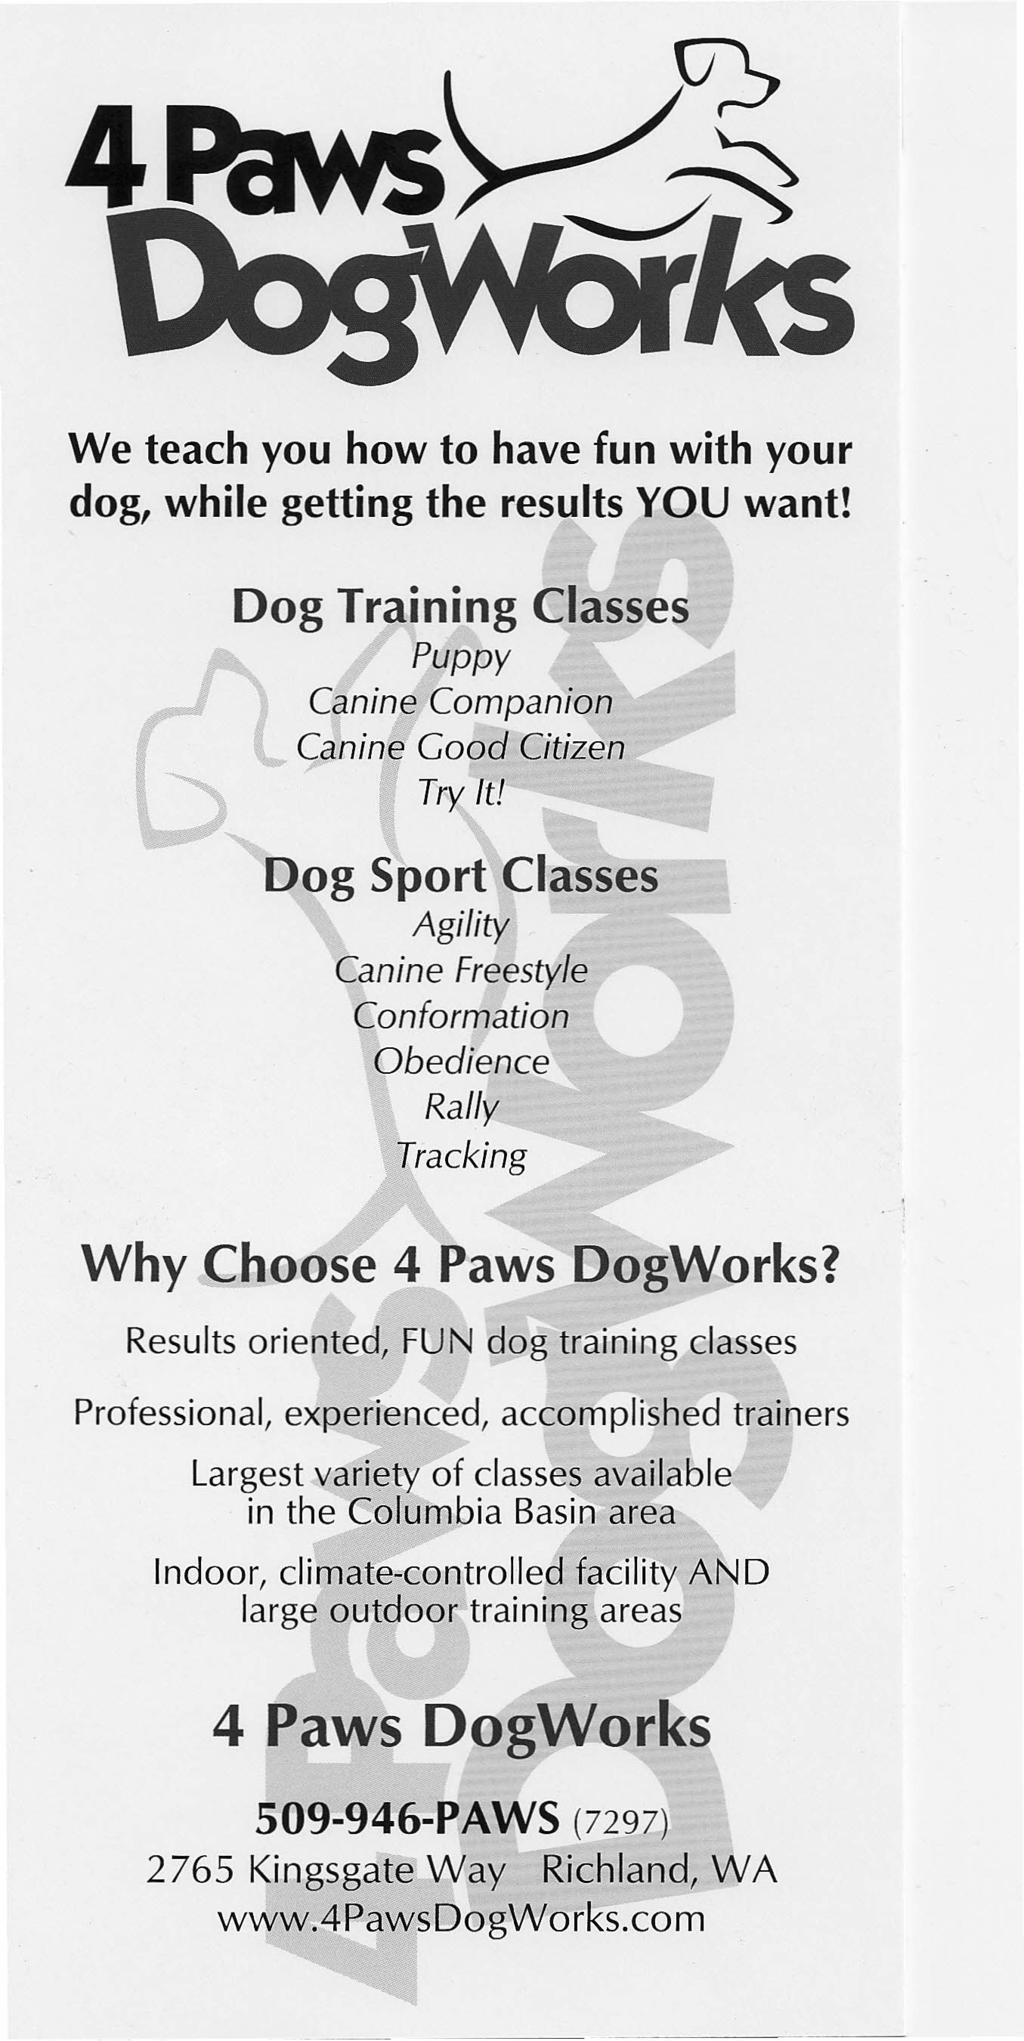 We teach you how to have fun with your dog, while getting the results YOU want! Dog Training Classes Puppy Canine Companion Canine Good Citizen Try It!